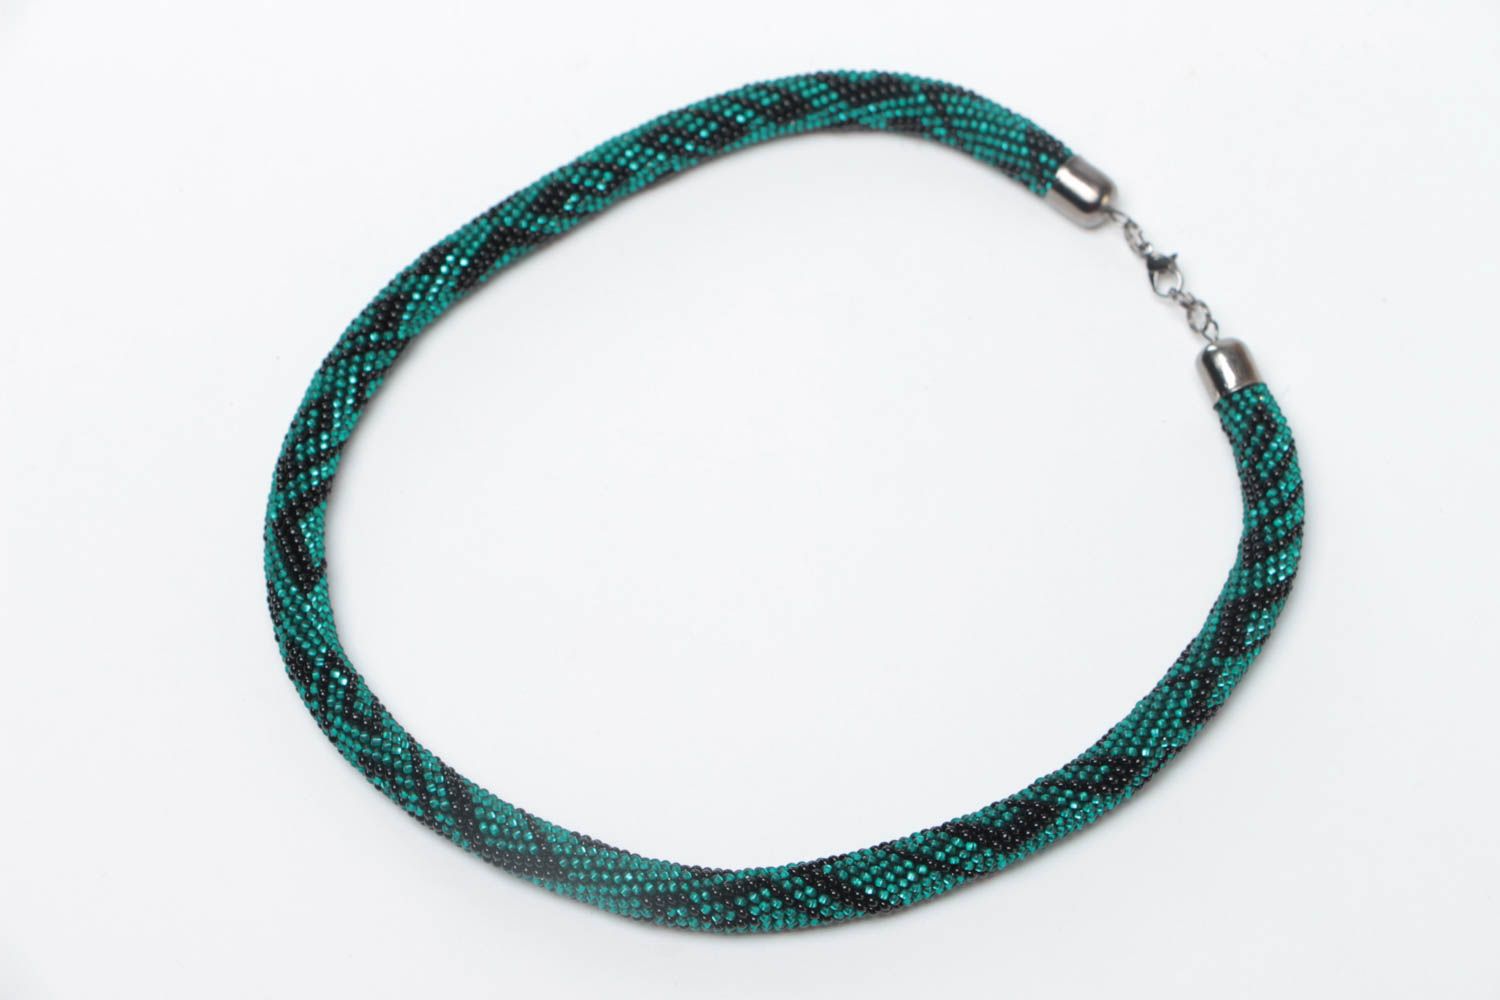 Handmade designer beaded cord women's necklace in black and emerald colors photo 2